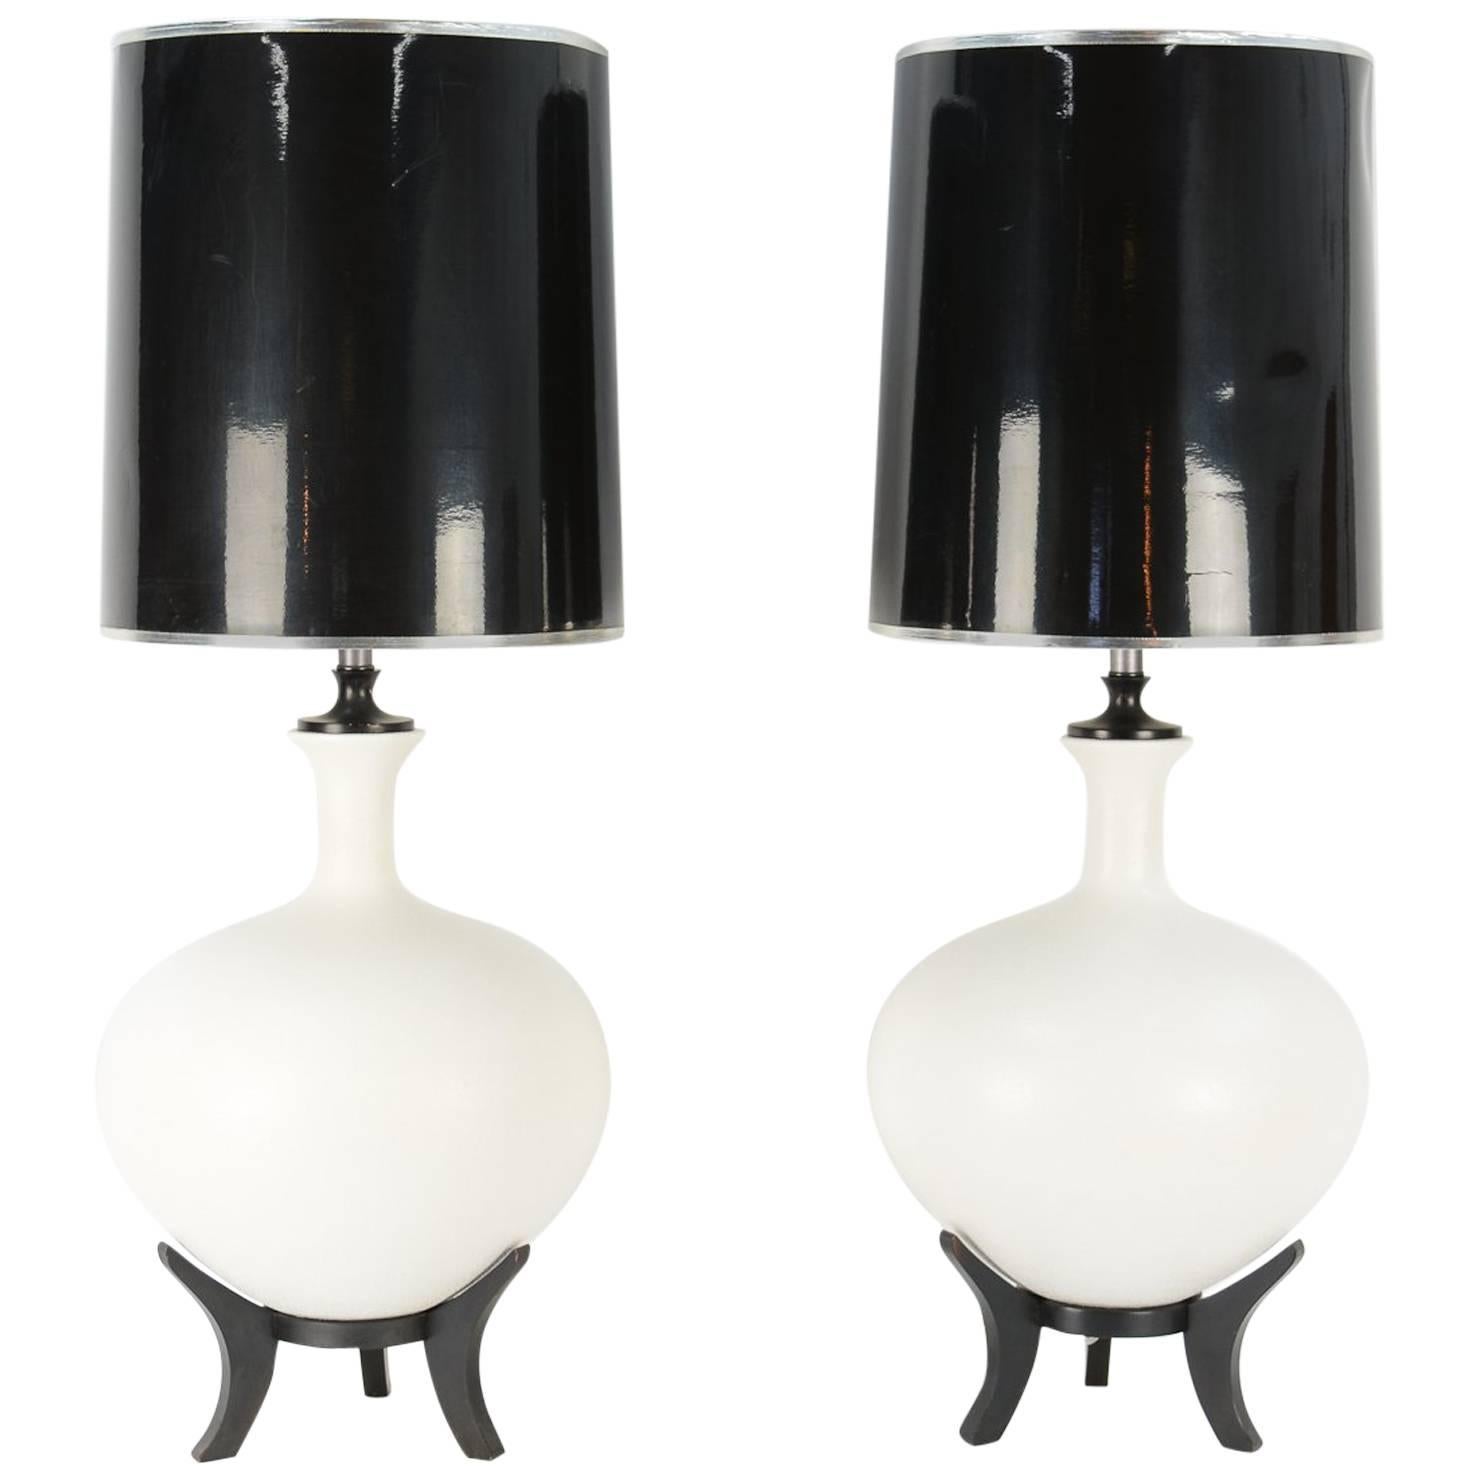 Pair of Textured Grand Danish Ceramic Lamps with Floating Tripod Bases